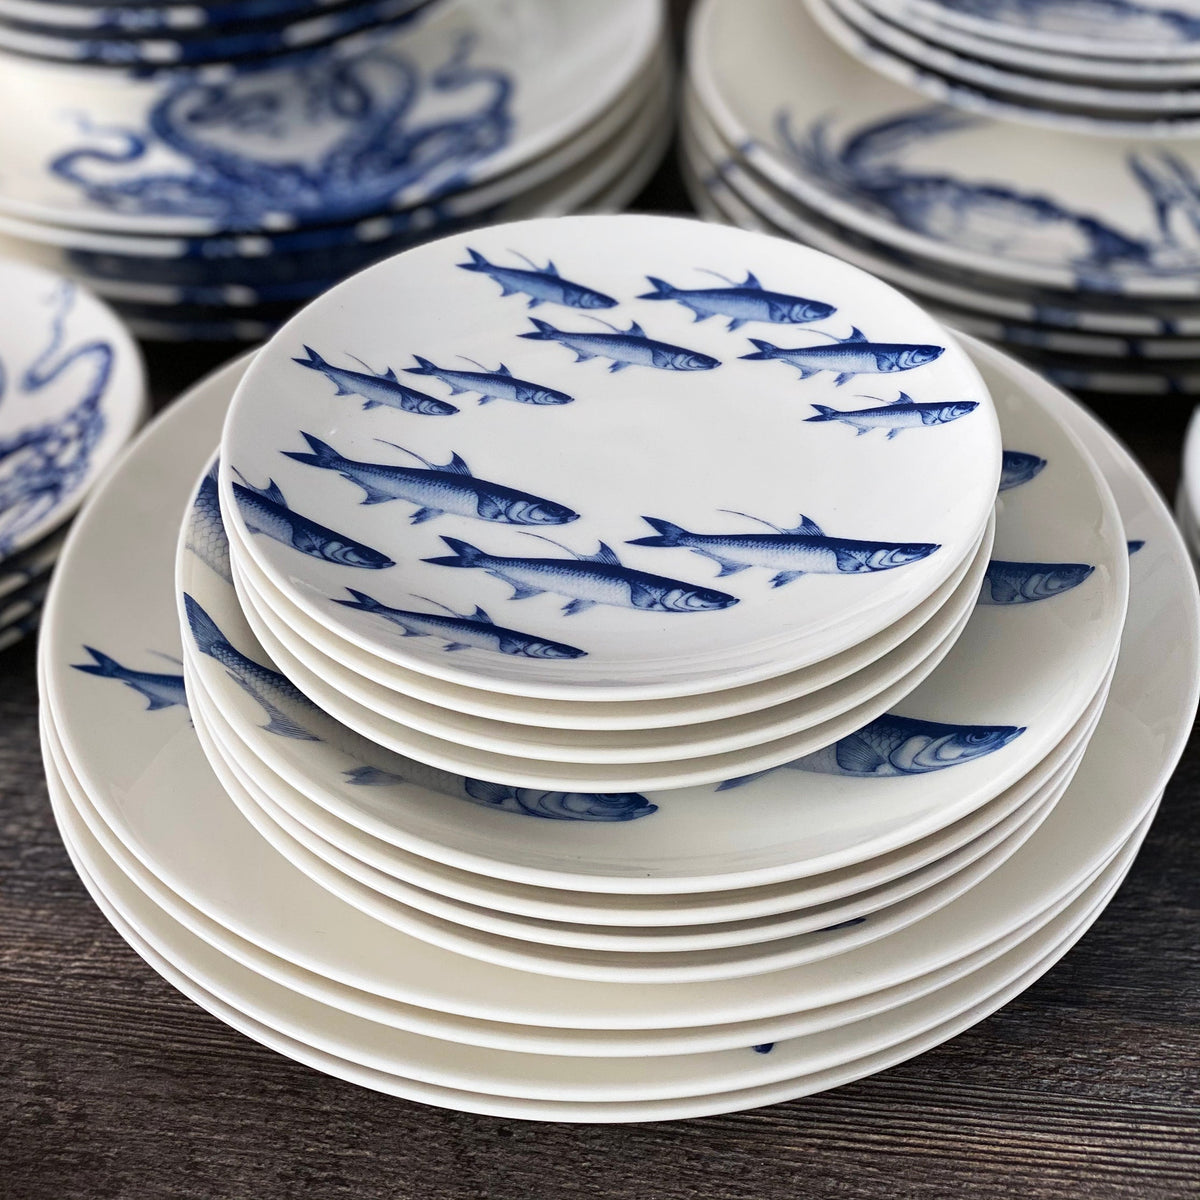 A Coastal Collection 48 Pc. Set of blue and white plates with fish patterns on them by Caskata Artisanal Home.